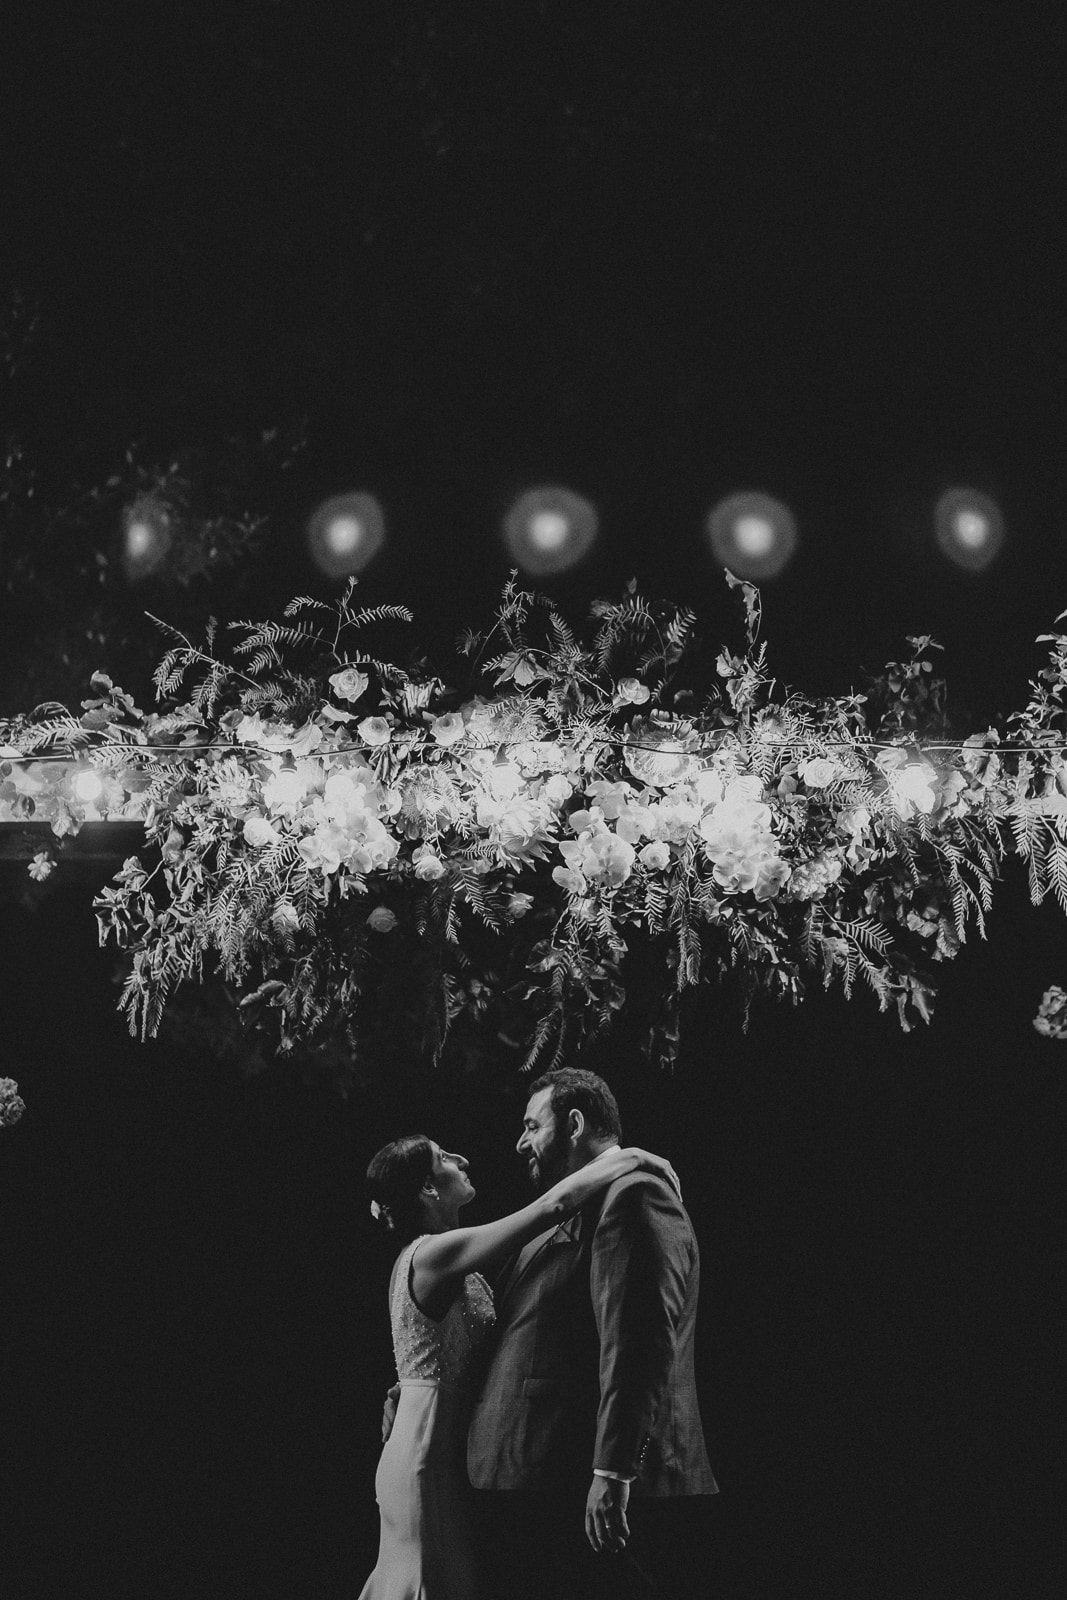 Romantic and emotional wedding photos - couple under flowers in nighttime at Flowerdale Estate